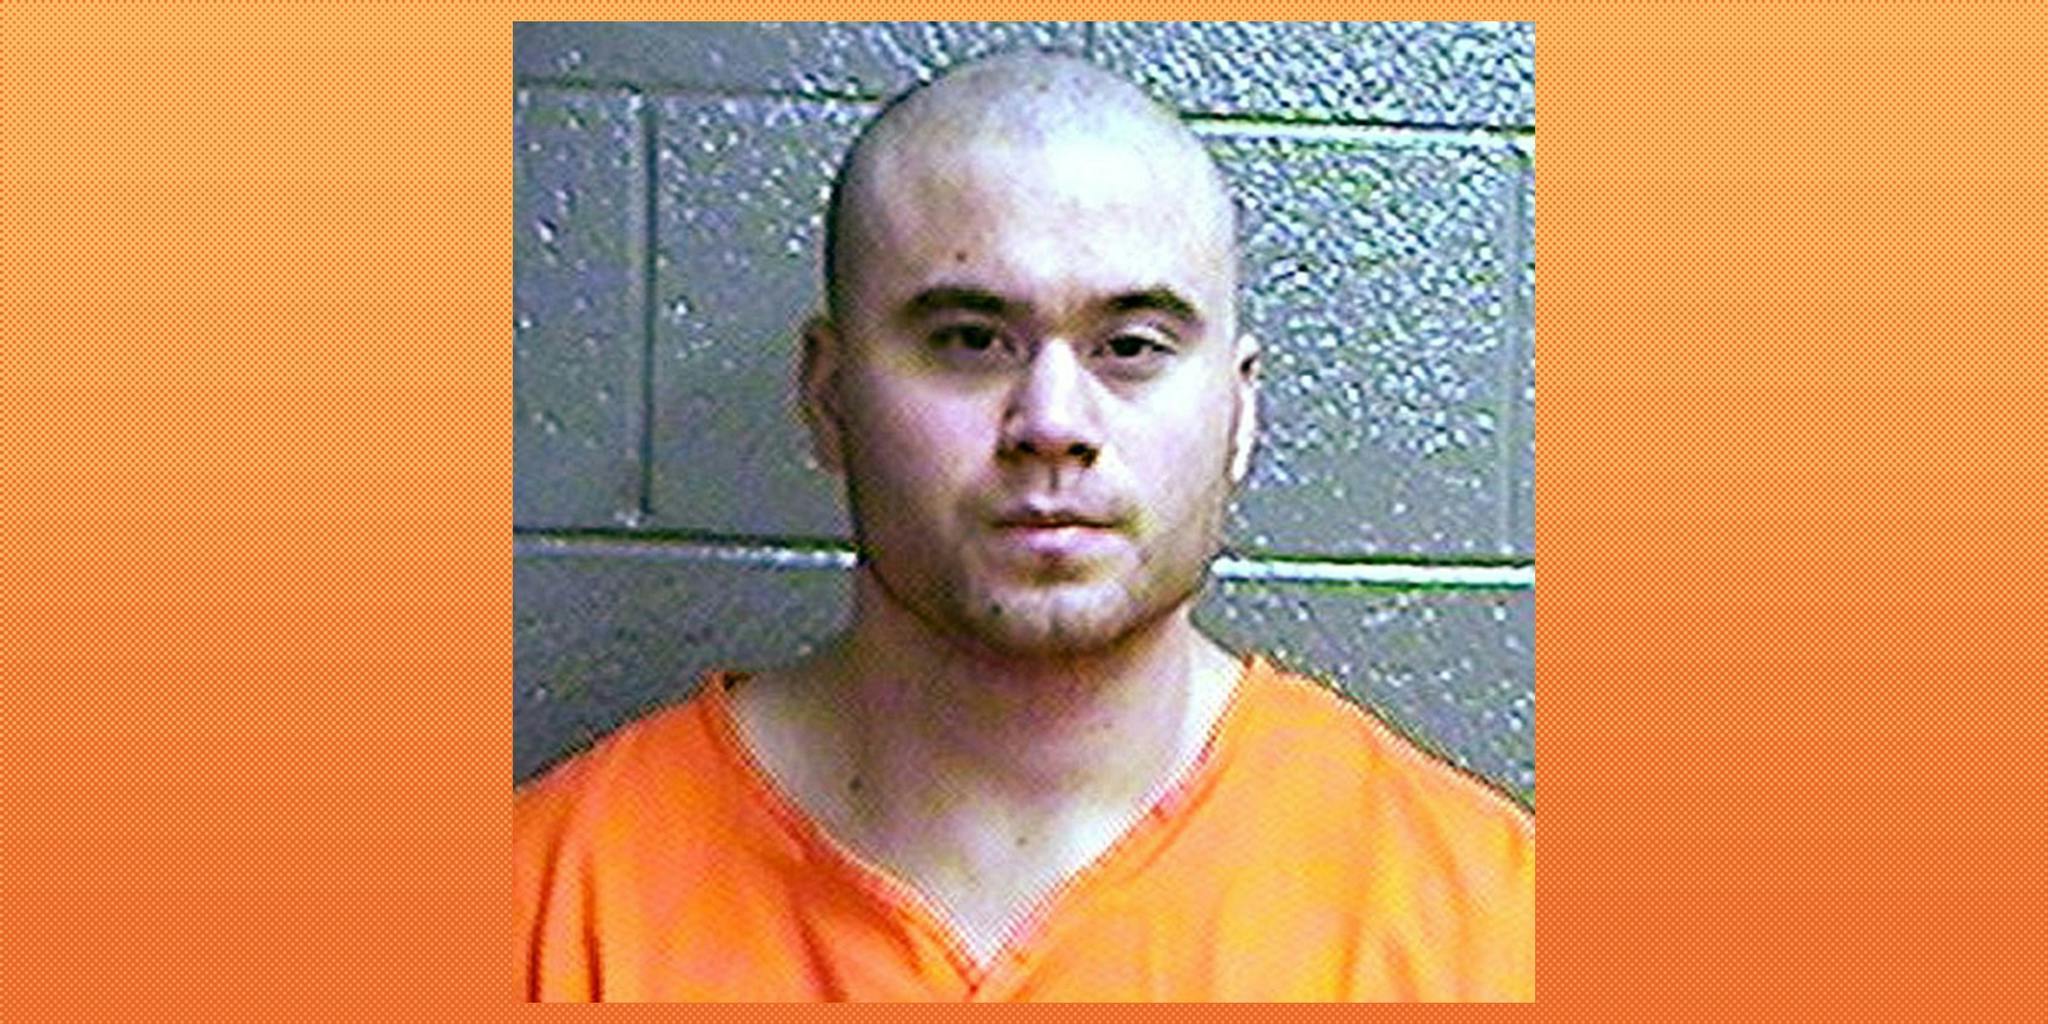 ExCop Daniel Holtzclaw, Convicted of 18 Counts of Rape, Files for an